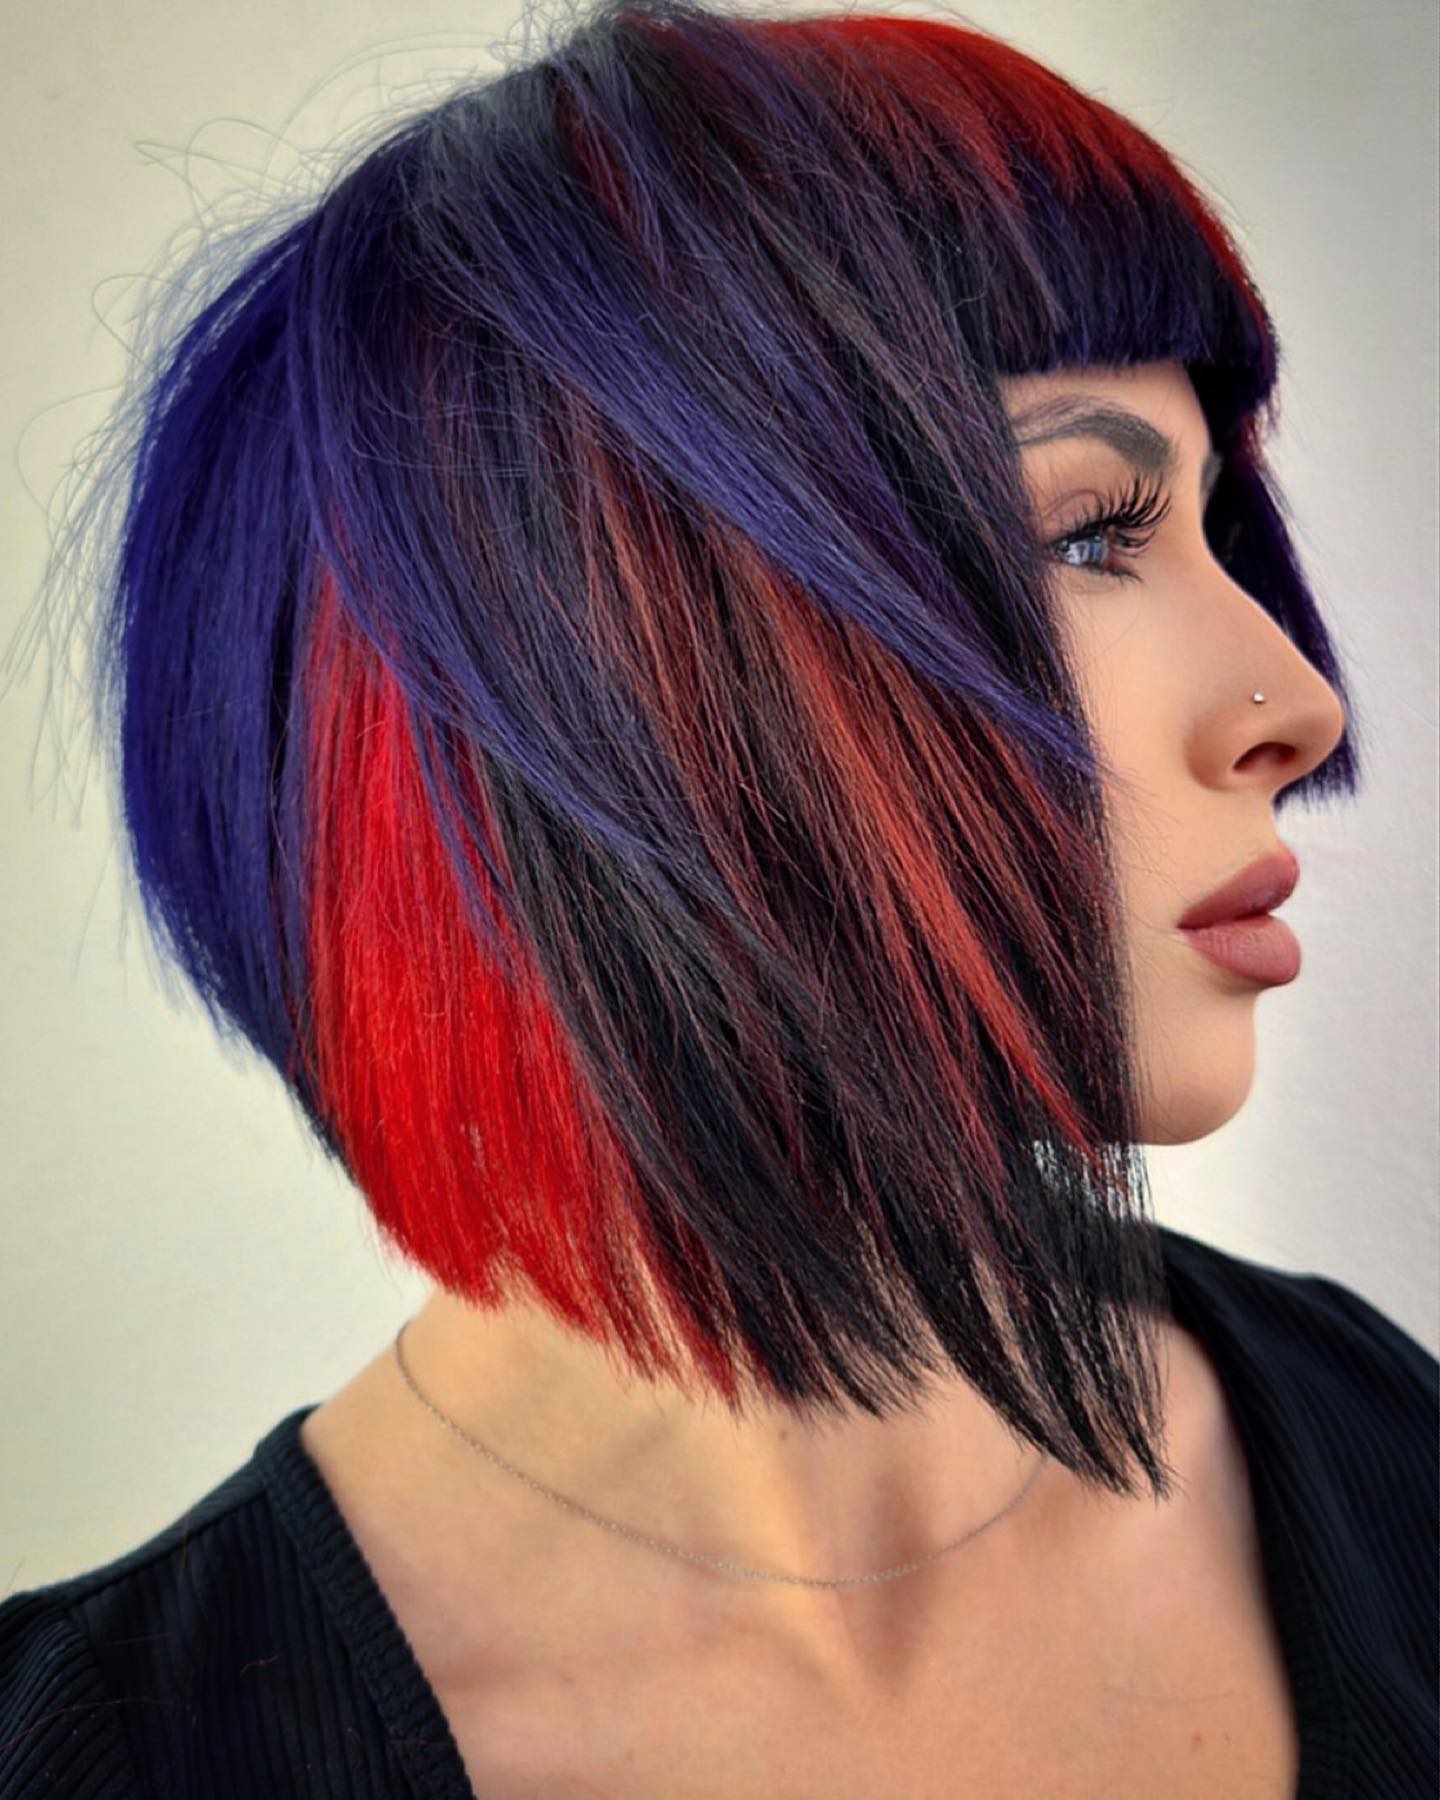 100+ Best Colorful Hair Ideas images 20